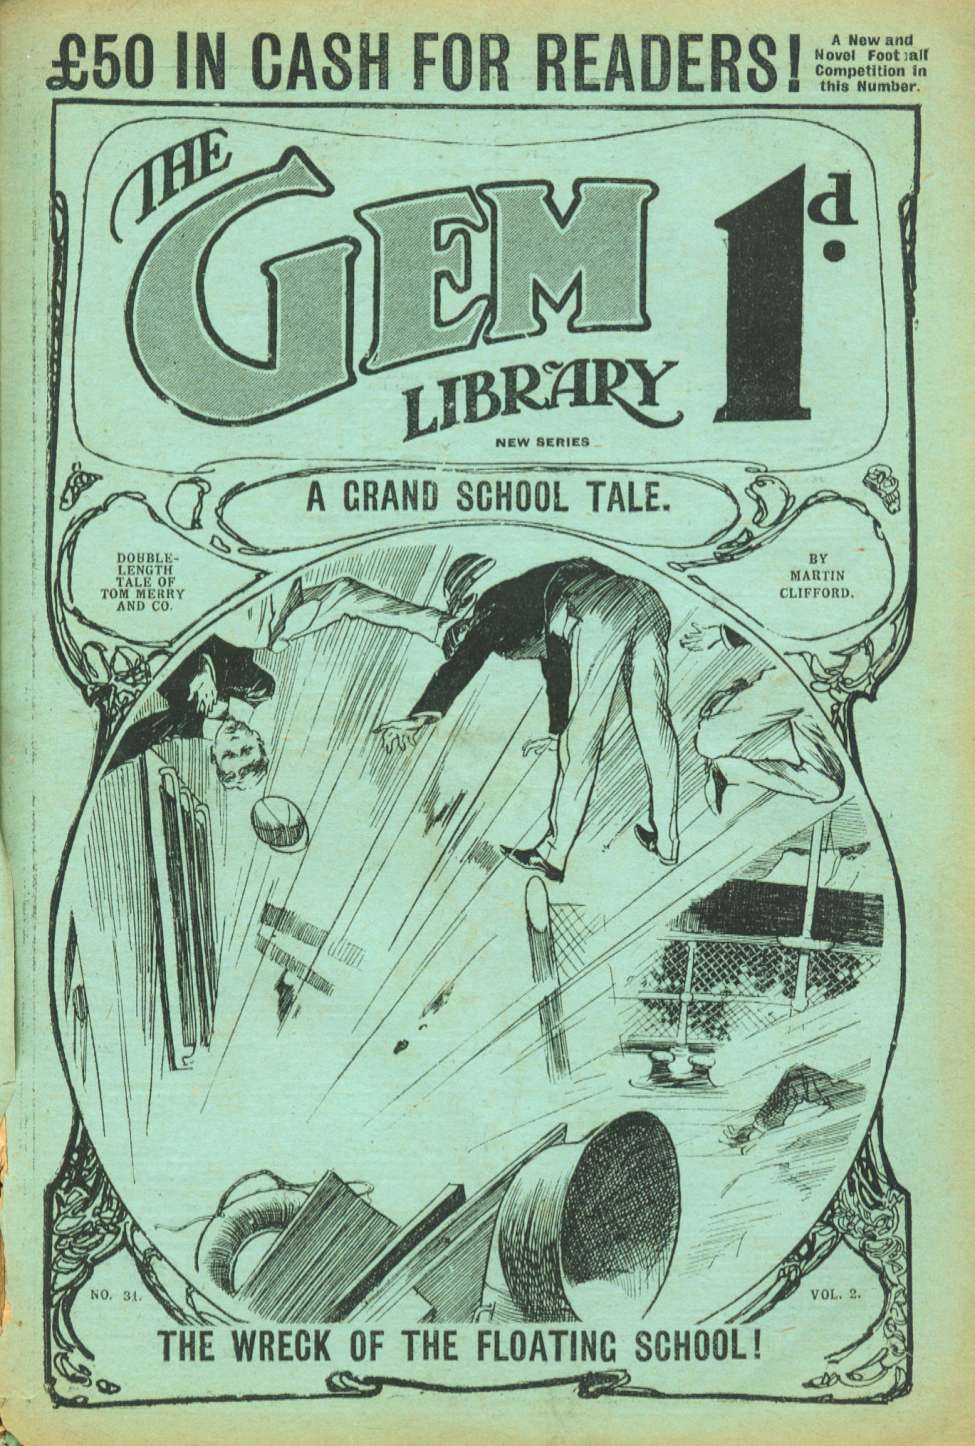 Book Cover For The Gem v2 31 - The Wreck of the Floating School